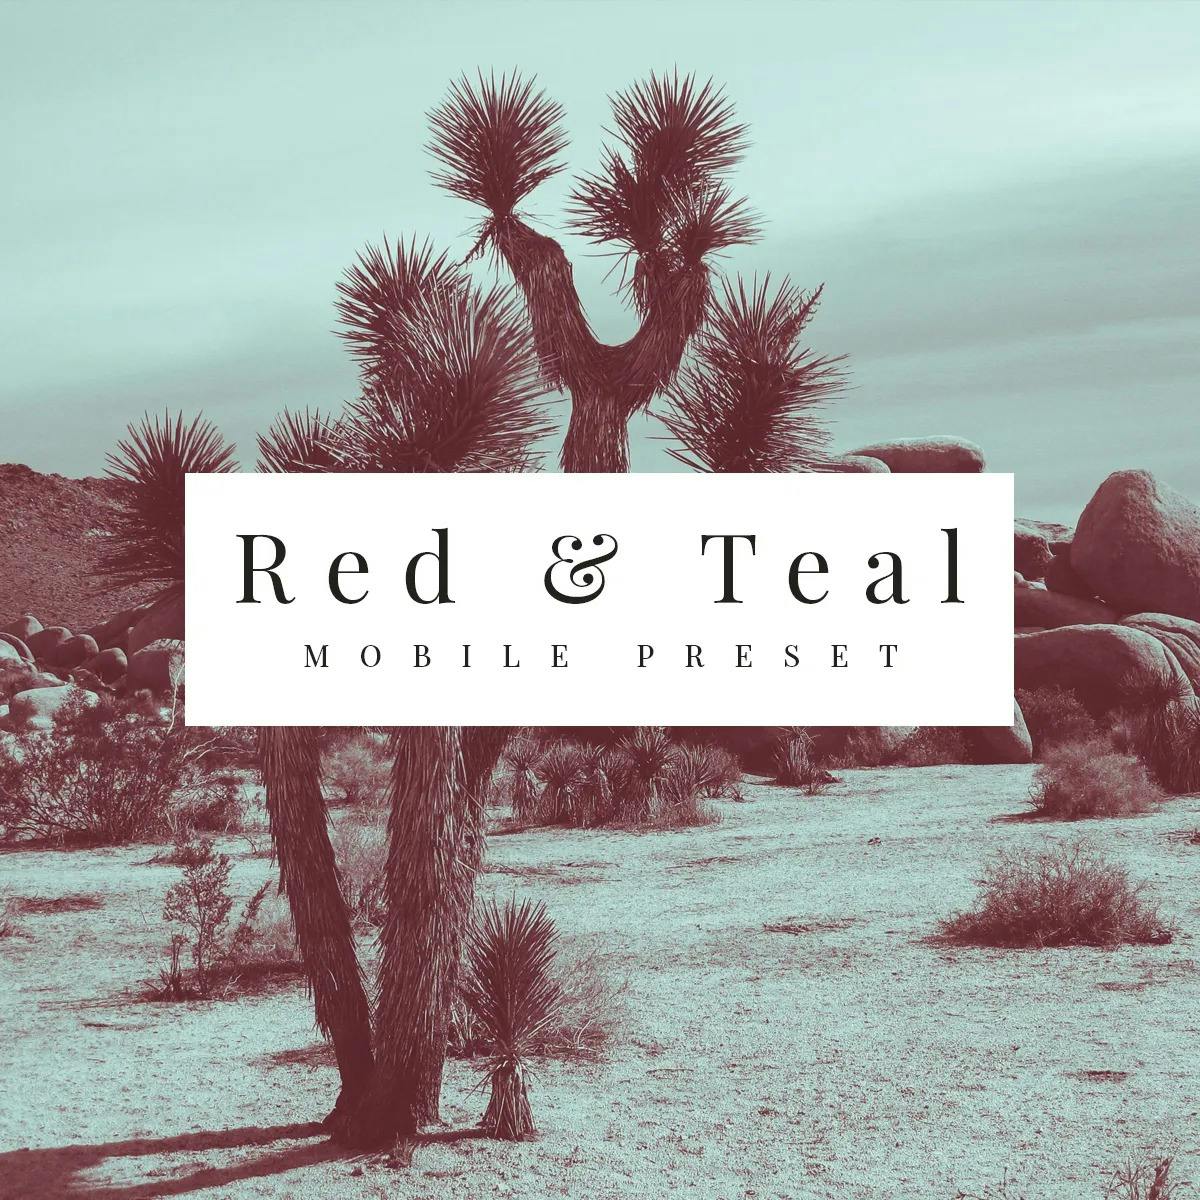 Red and teal photo of a desert with cacti.